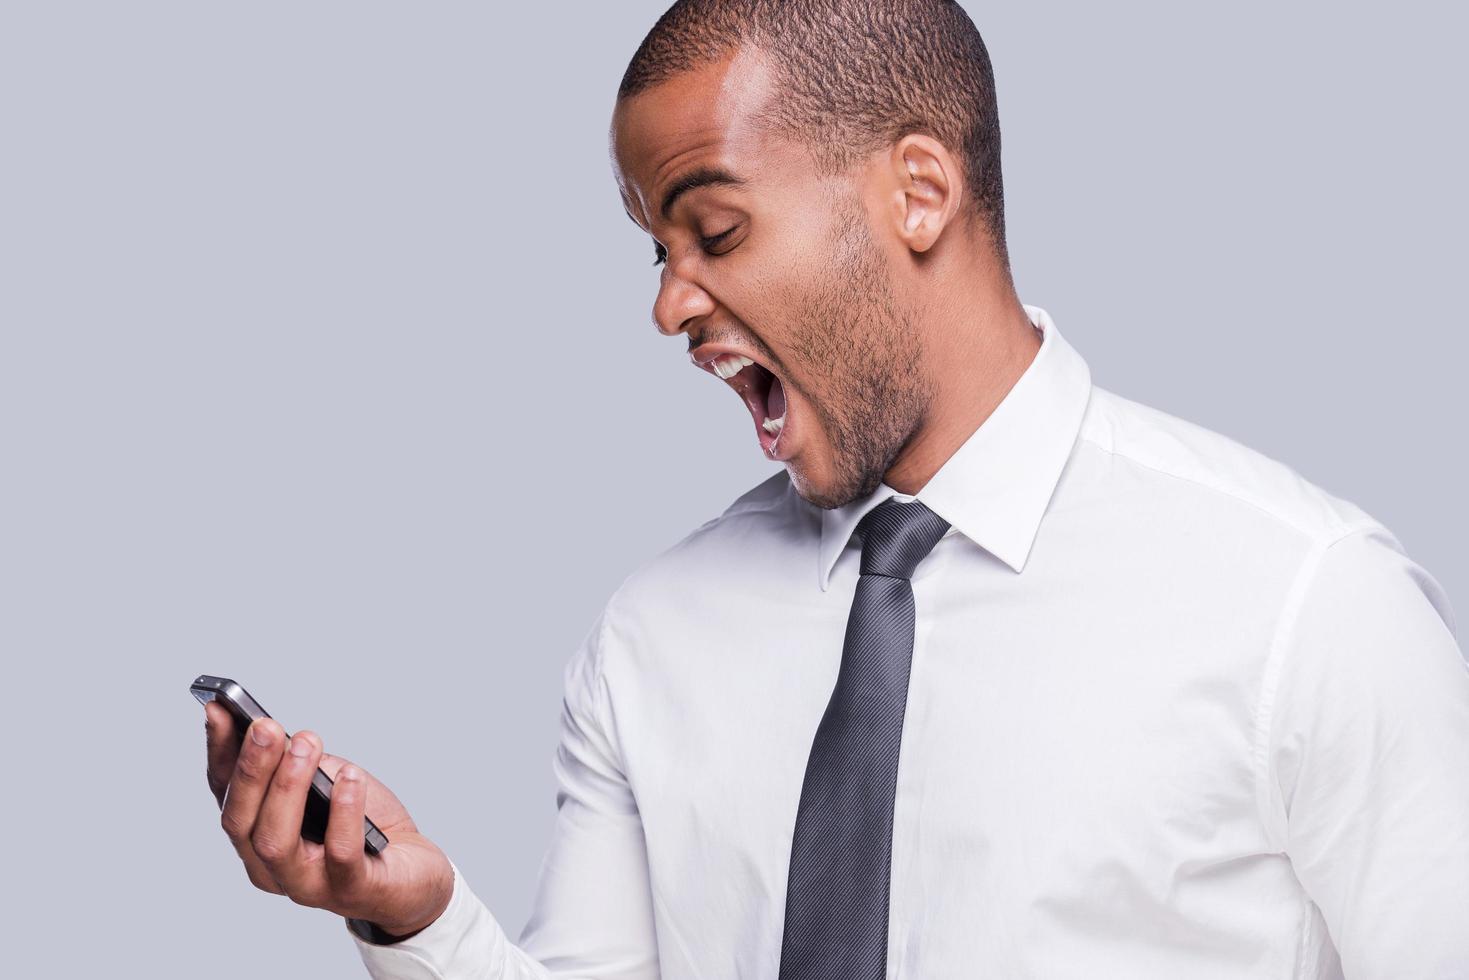 Very bad news. Furious young African man in shirt and tie holding mobile phone and shouting while standing against grey background photo